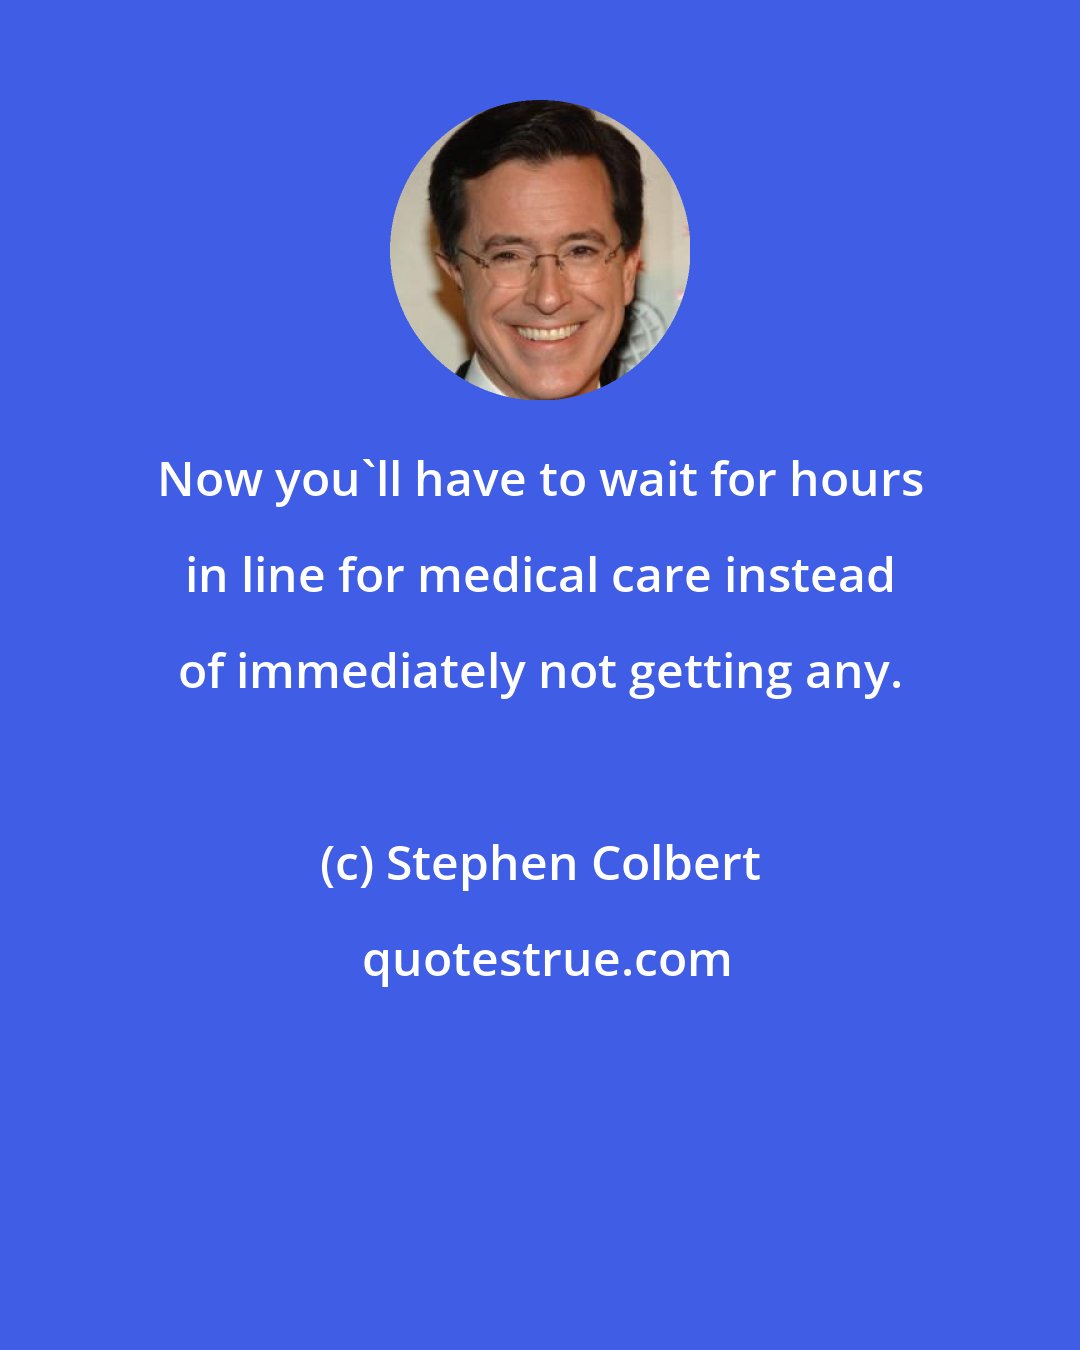 Stephen Colbert: Now you'll have to wait for hours in line for medical care instead of immediately not getting any.